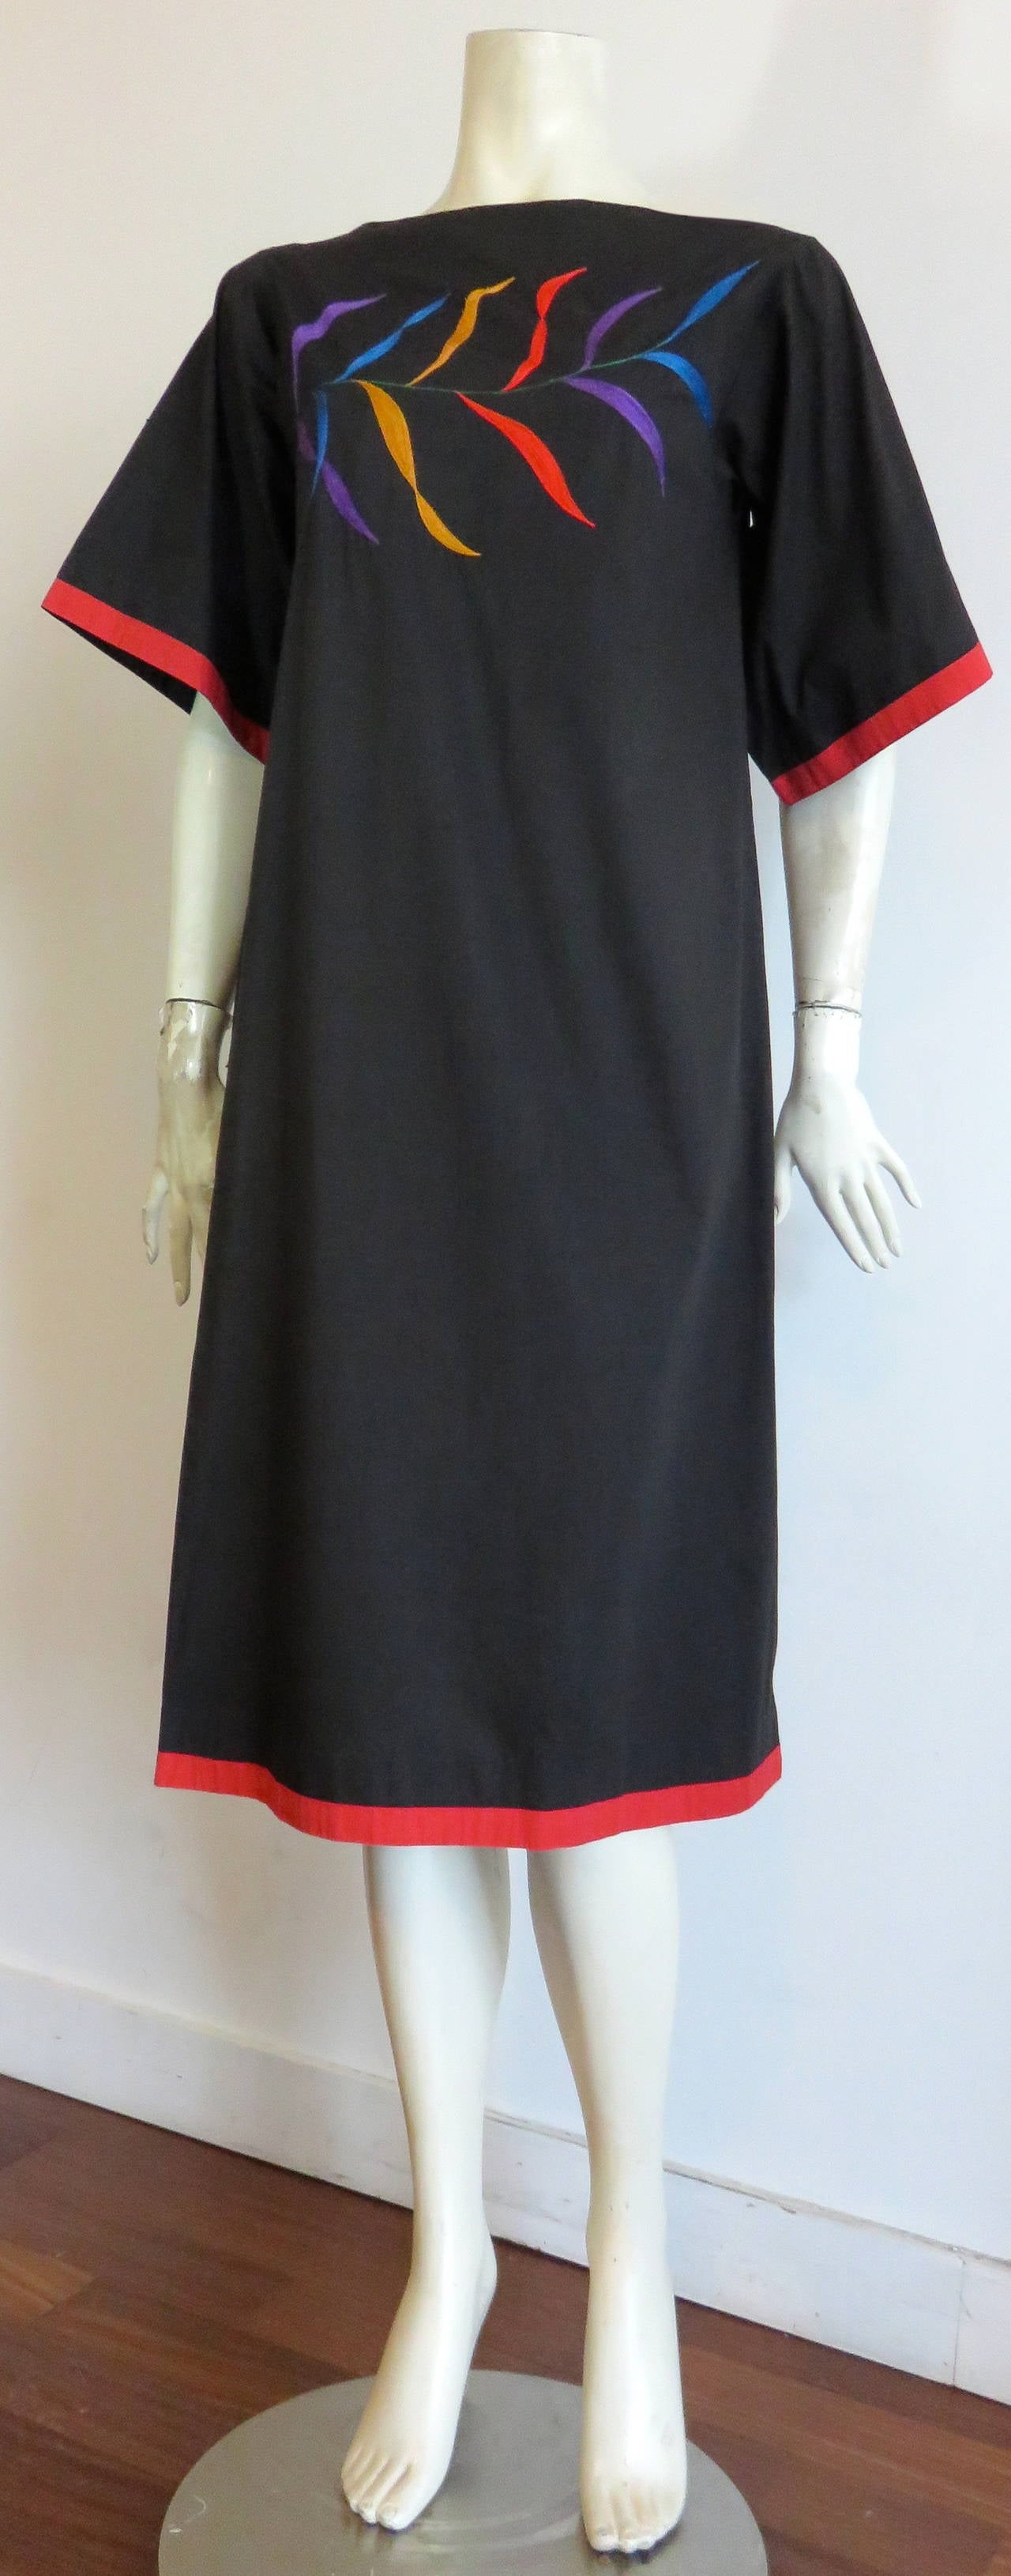 Excellent condition, 1970's TREACY LOWE, embroidered palm-leaf tunic dress.

Black cotton shell with red binding at sleeve and body hem-line.

Multi-color, palm-leaf embroidery at front chest.

Concealed, center-back zipper